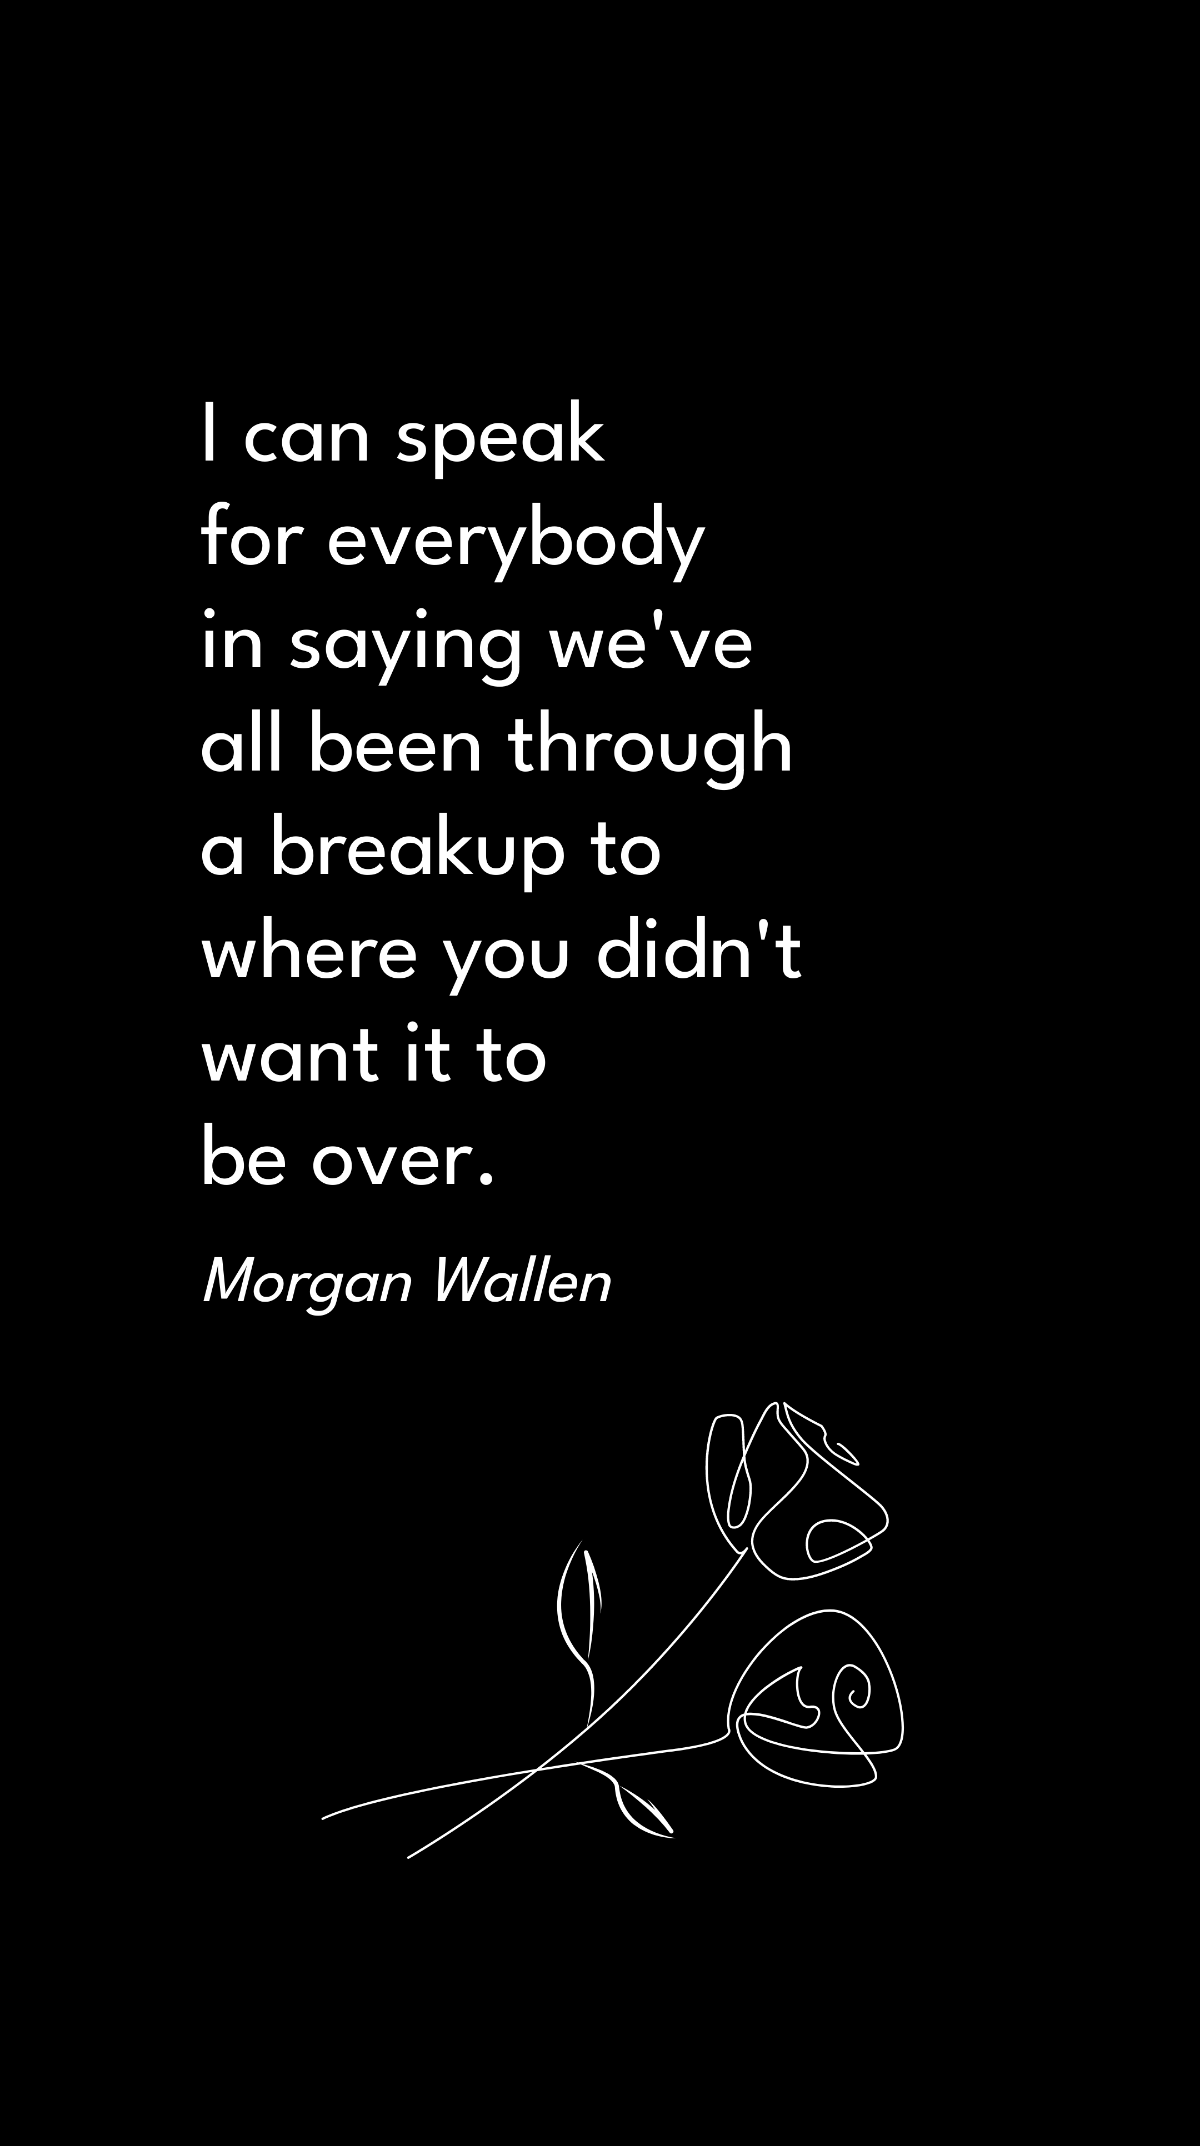 Morgan Wallen - I can speak for everybody in saying we've all been through a breakup to where you didn't want it to be over. Template